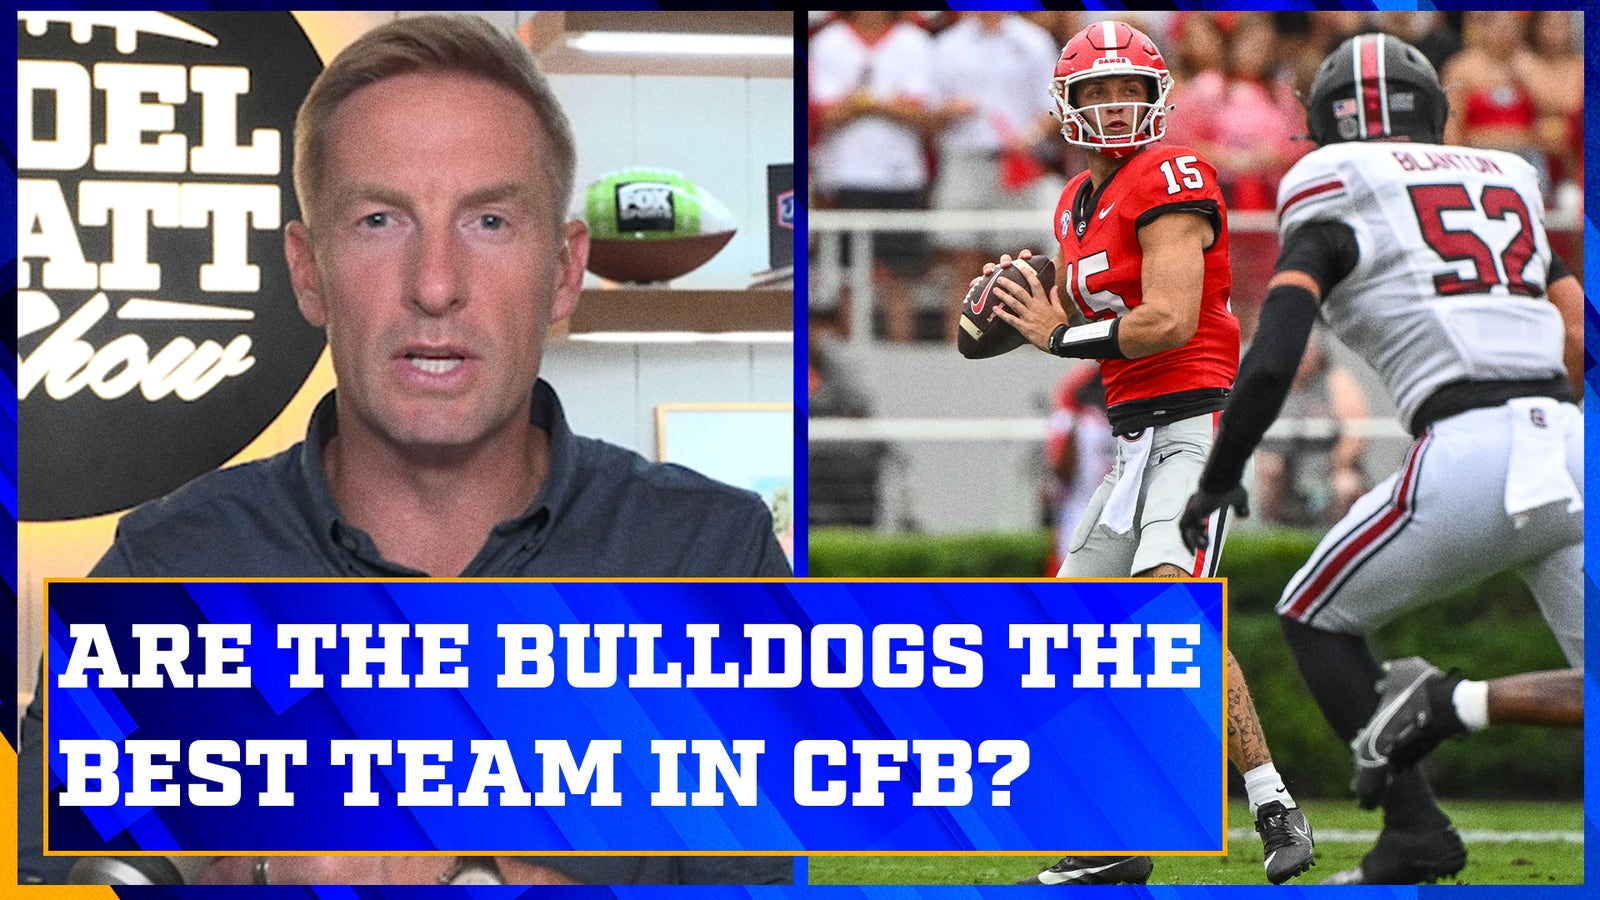 Do the Georgia Bulldogs still look like the best team in the country?